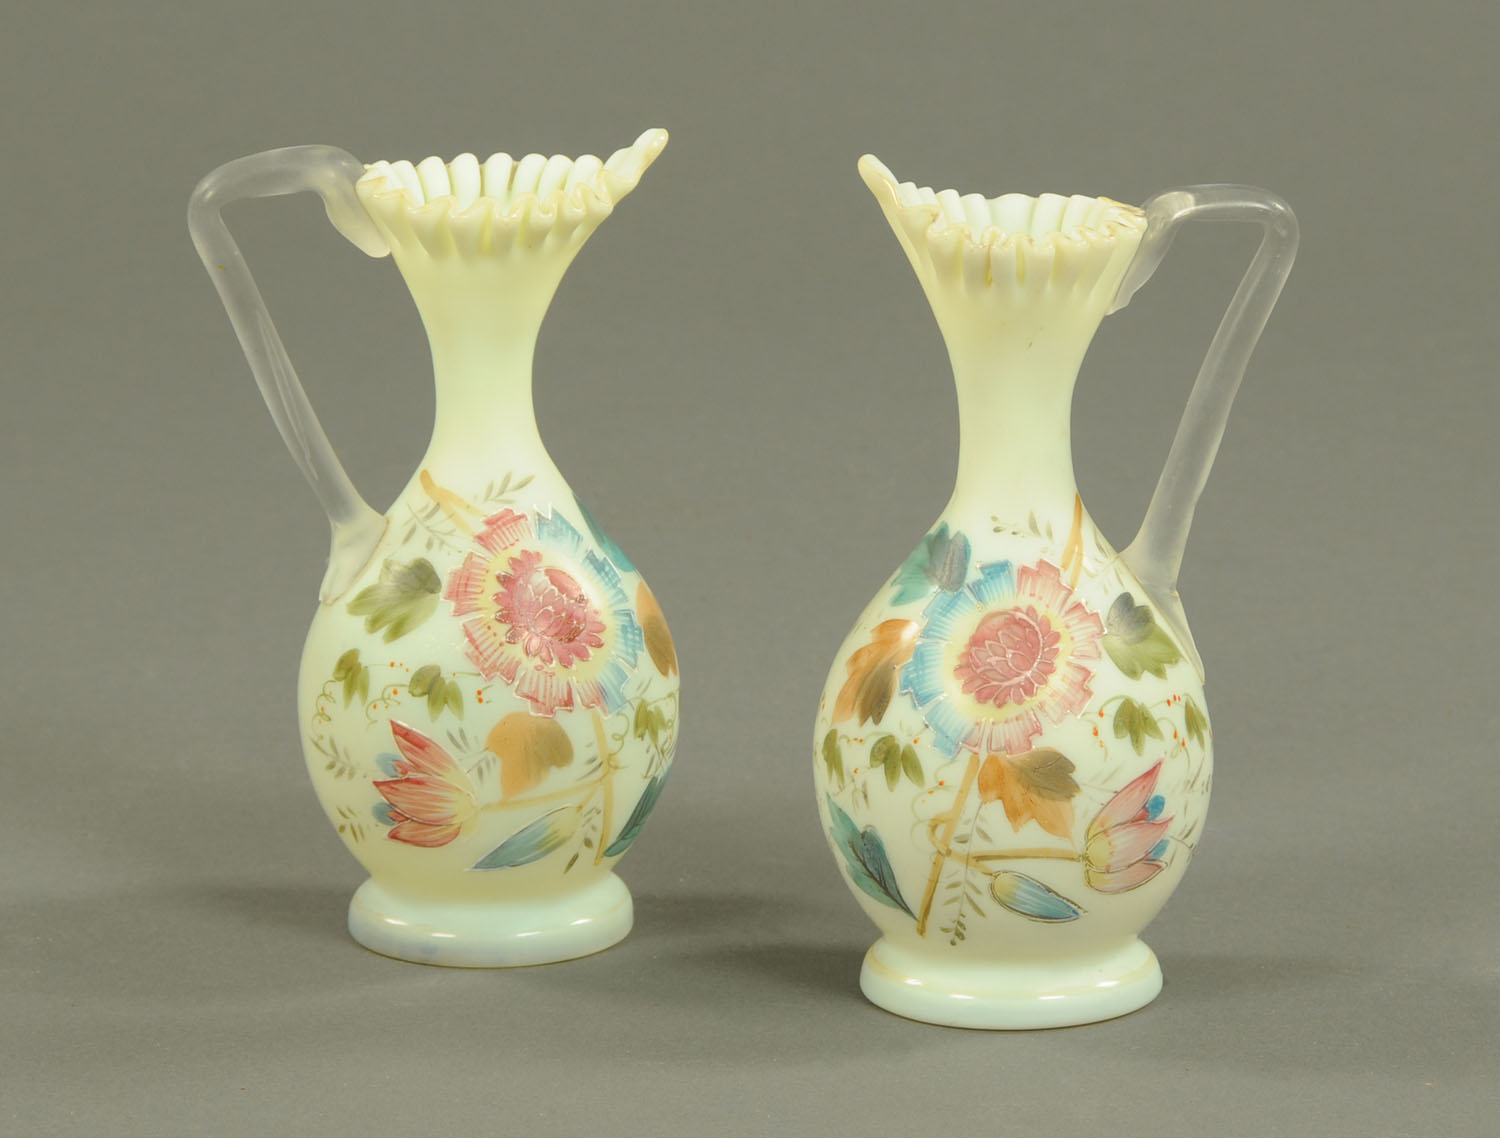 A pair of Victorian opaque glass vases, with folded rims and hand painted with floral sprays.